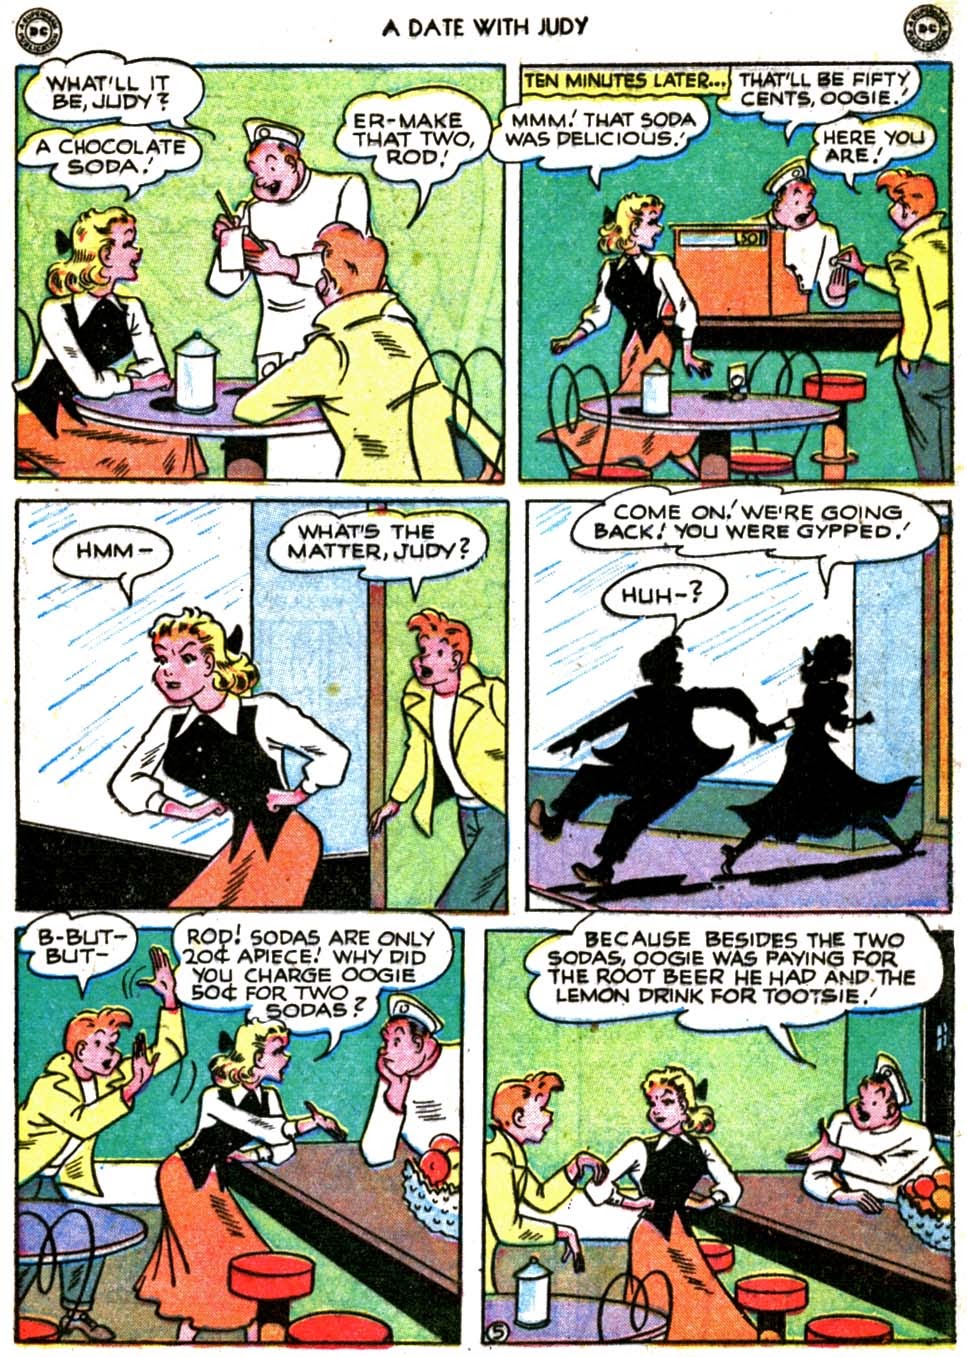 Read online A Date with Judy comic -  Issue #10 - 49